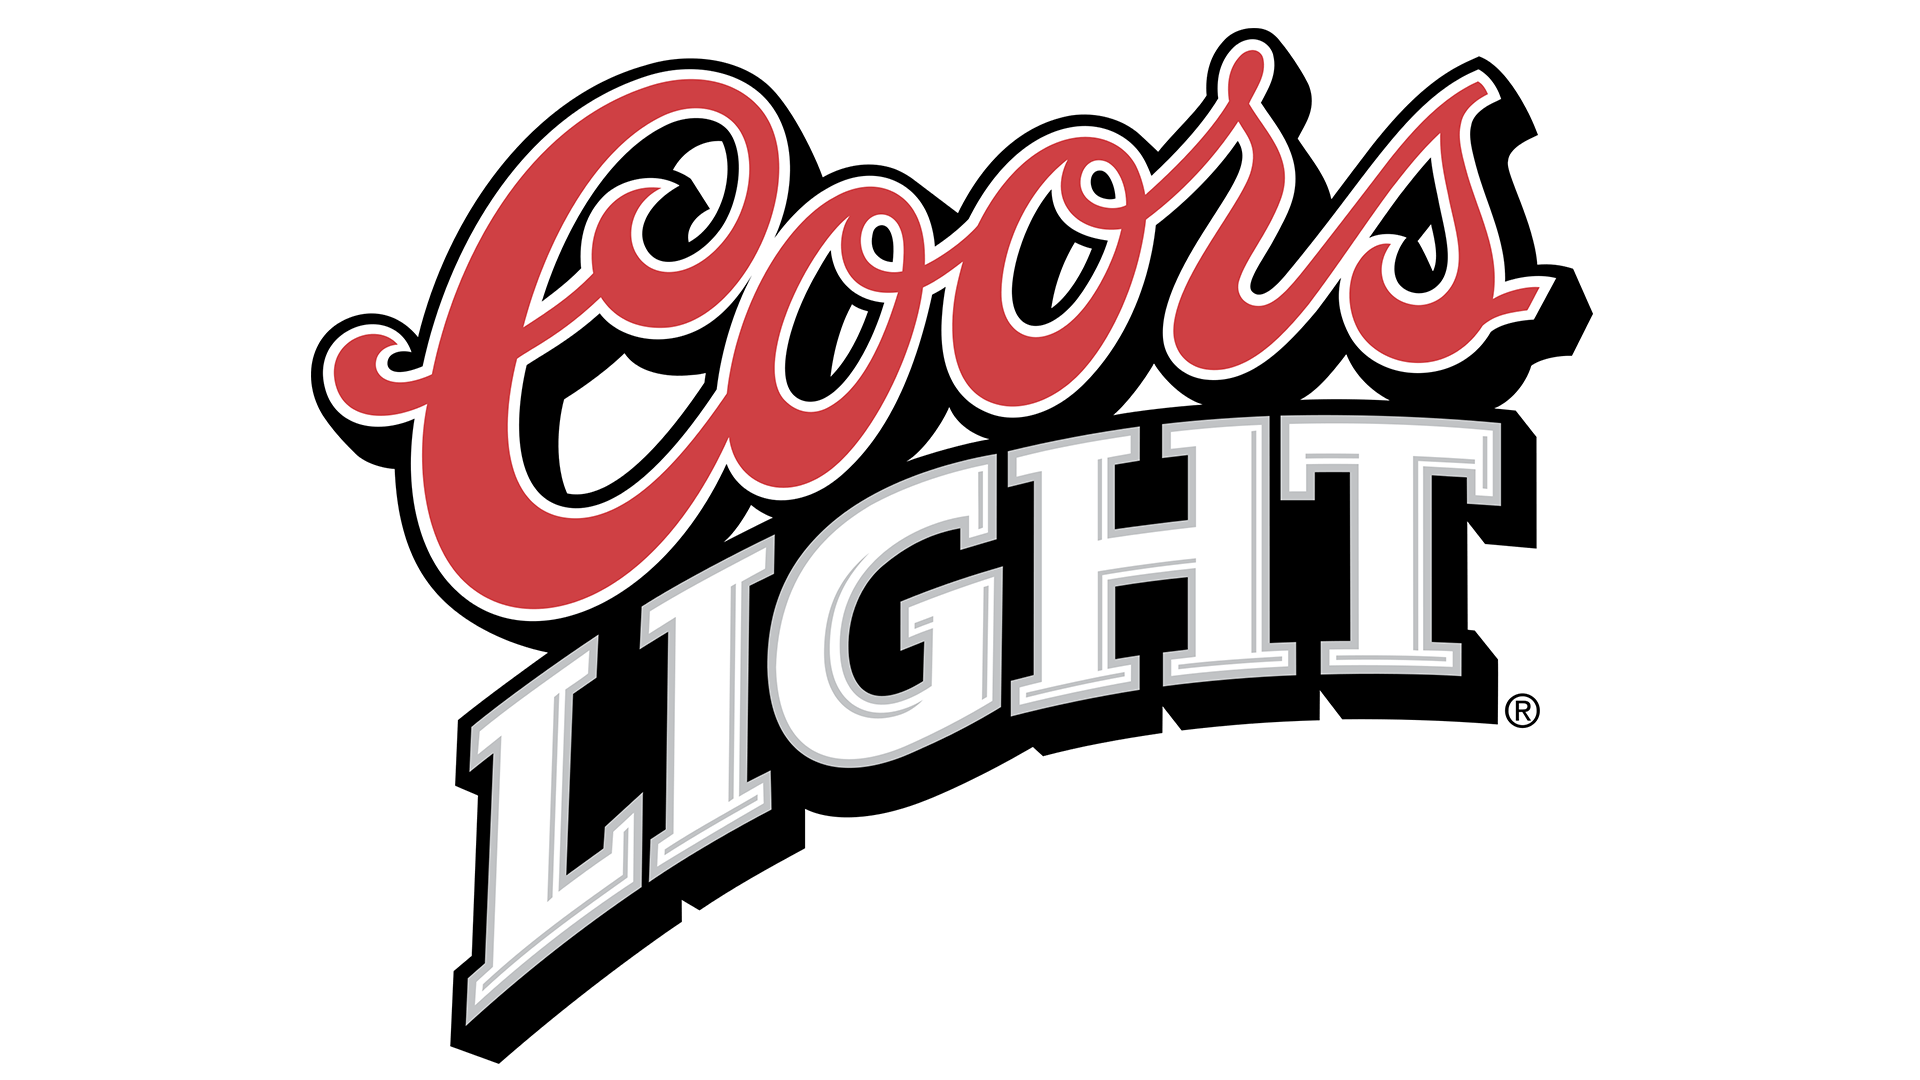 Coors Light Mountain Outline Logo - Coors Light logo, symbol, meaning, History and Evolution